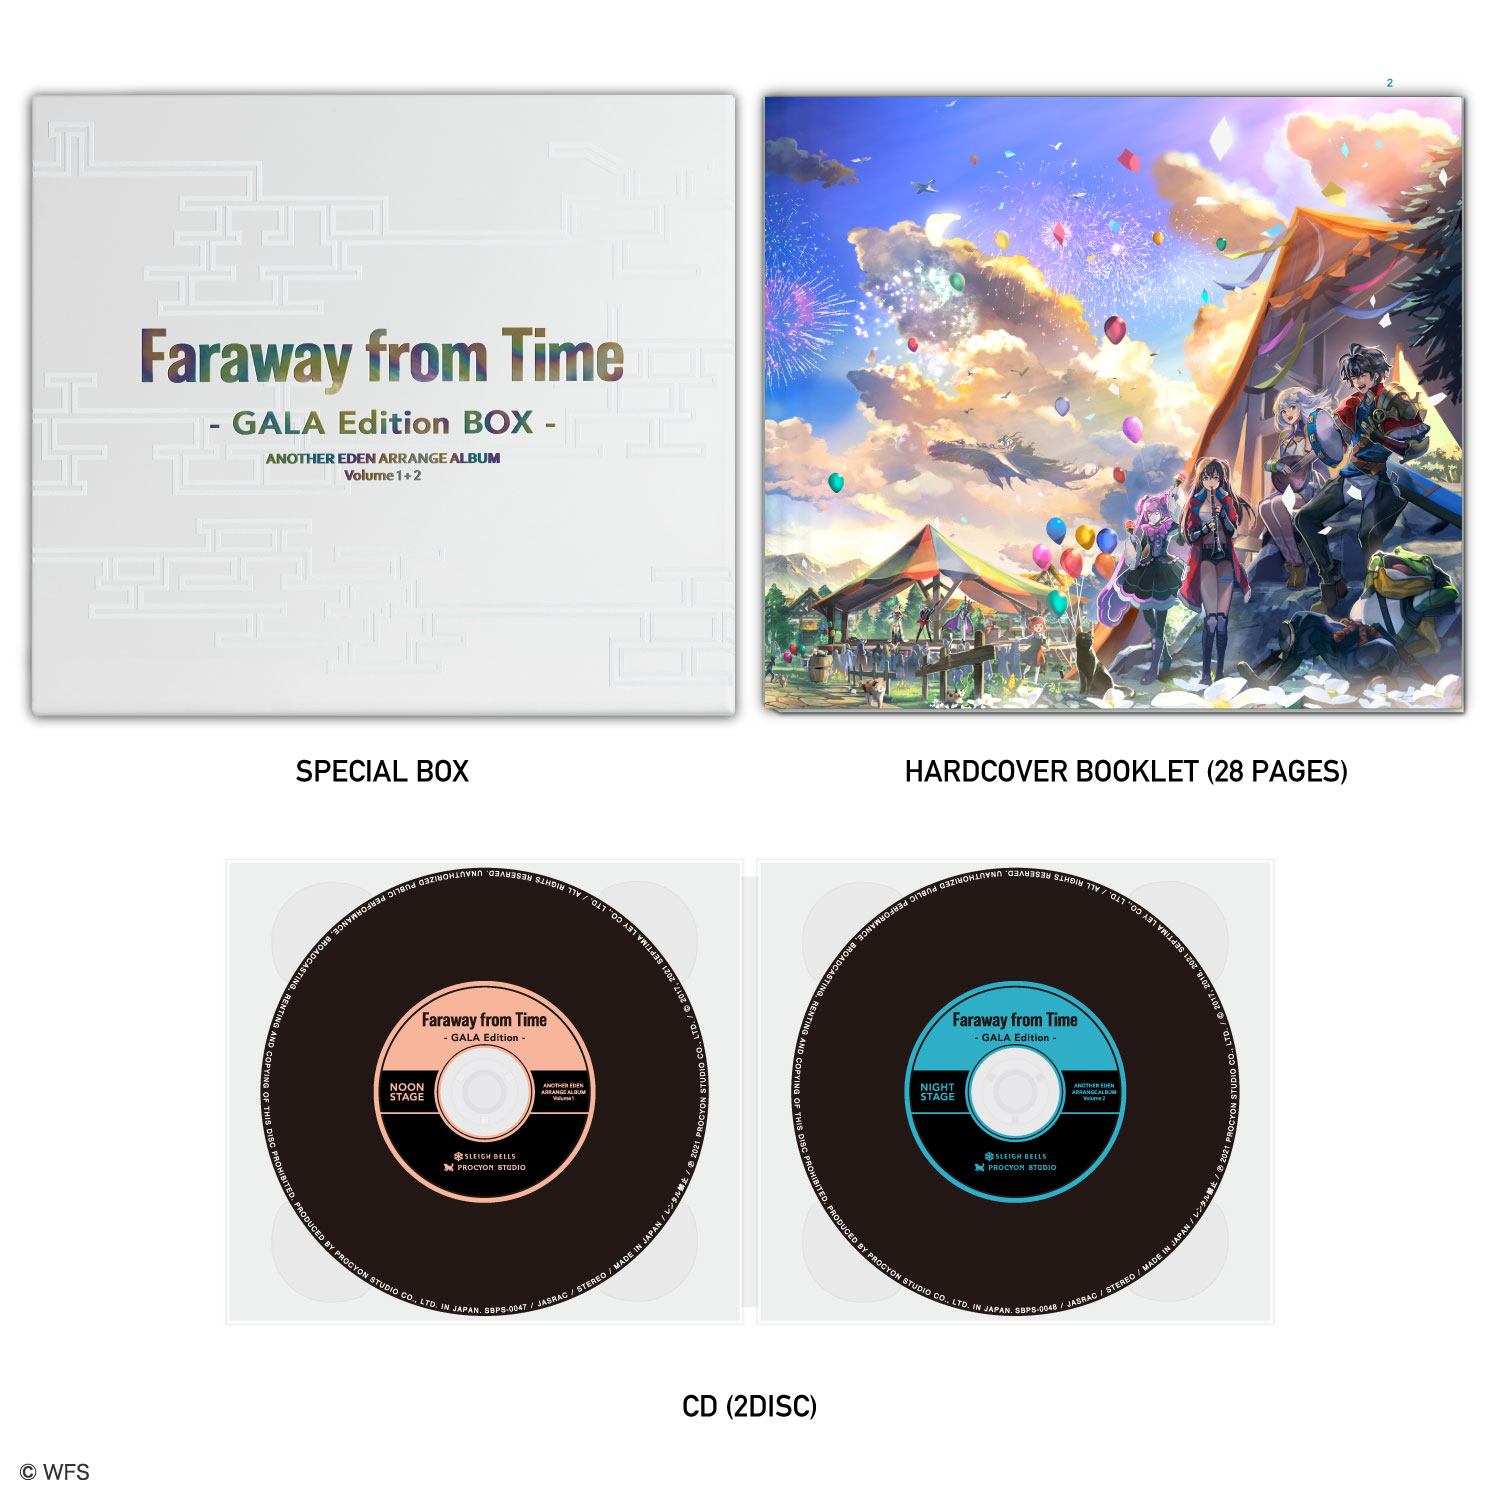 Faraway from Time - GALA Edition BOX - CD Version